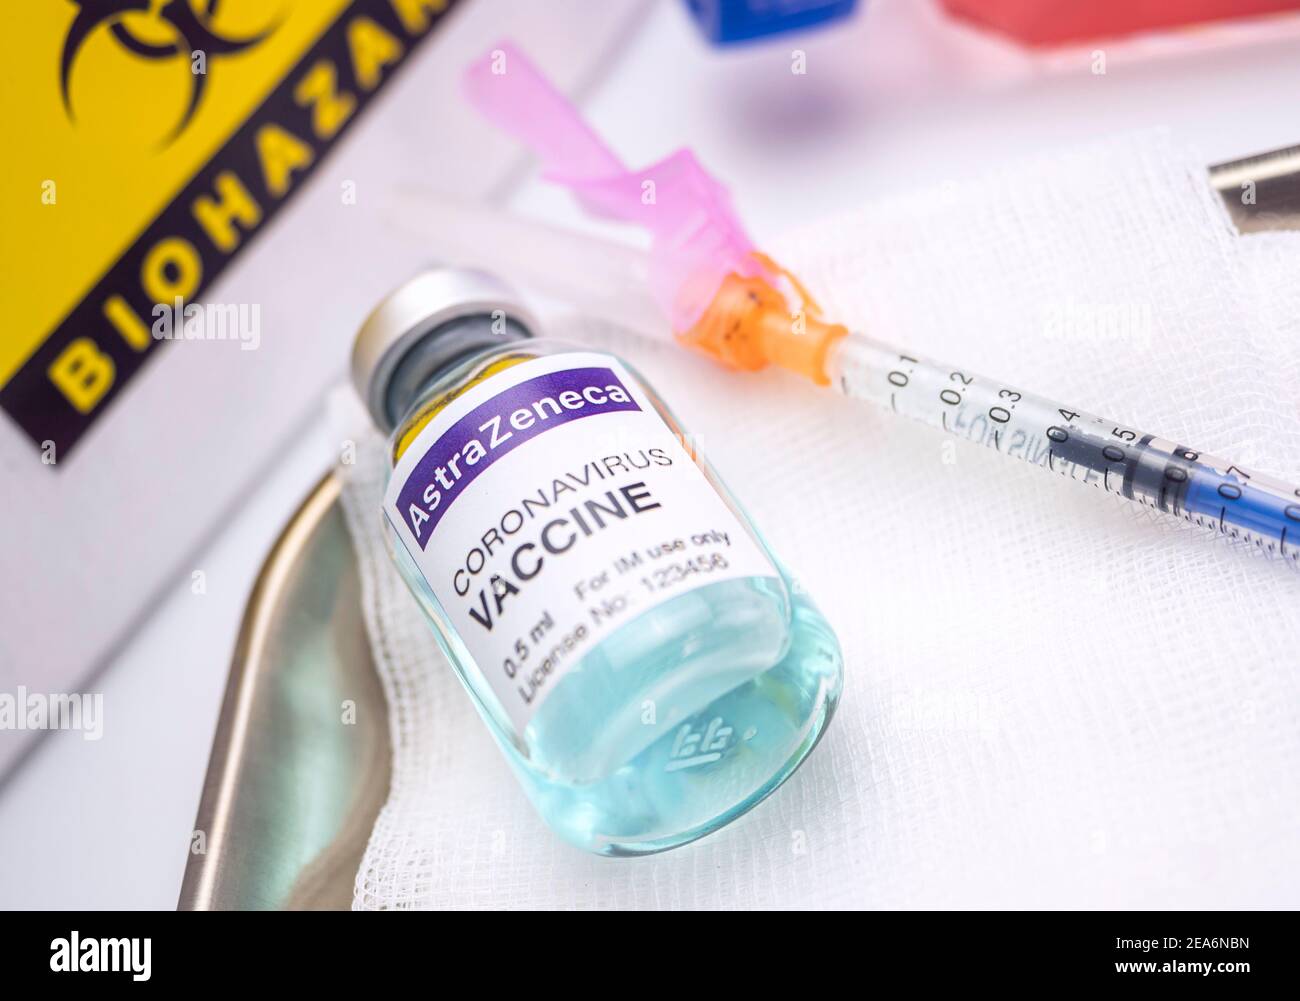 Vial of vaccine from Astrazeneca ready for injection, imaginary recreation for conceptual image. Stock Photo